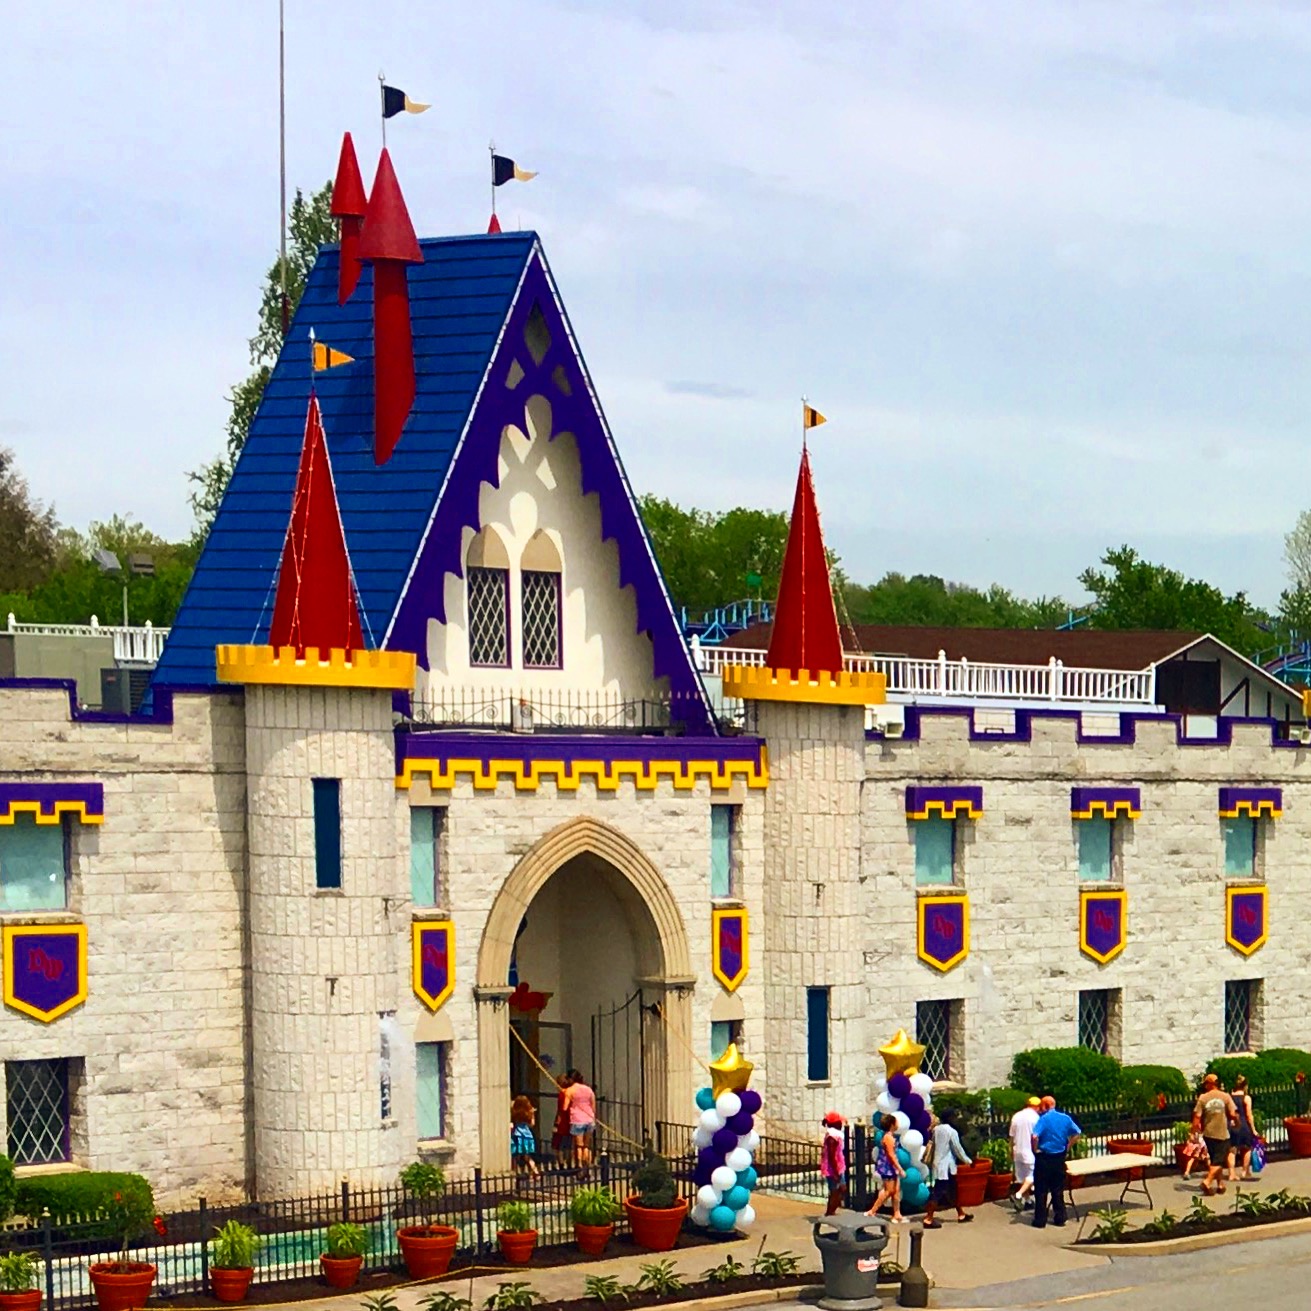 Top Ten Tips for Dutch Wonderland - Been There Done That with Kids